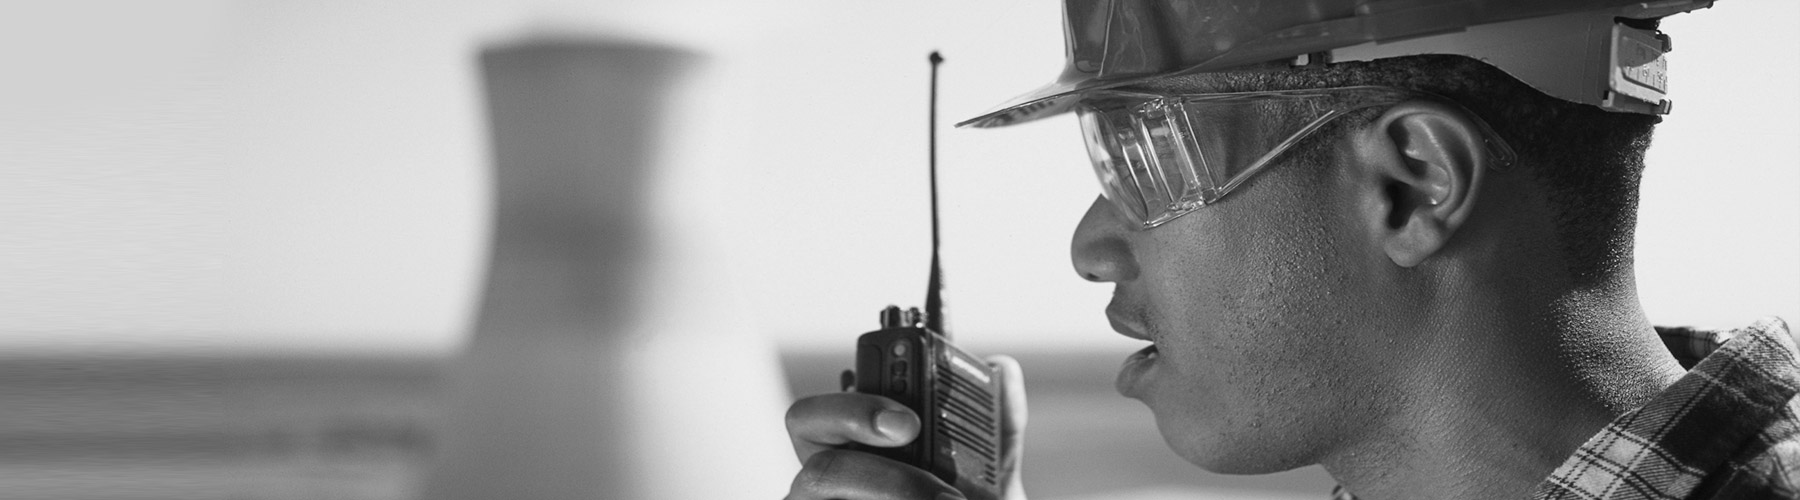 black and white picture of construction worker holding radio device